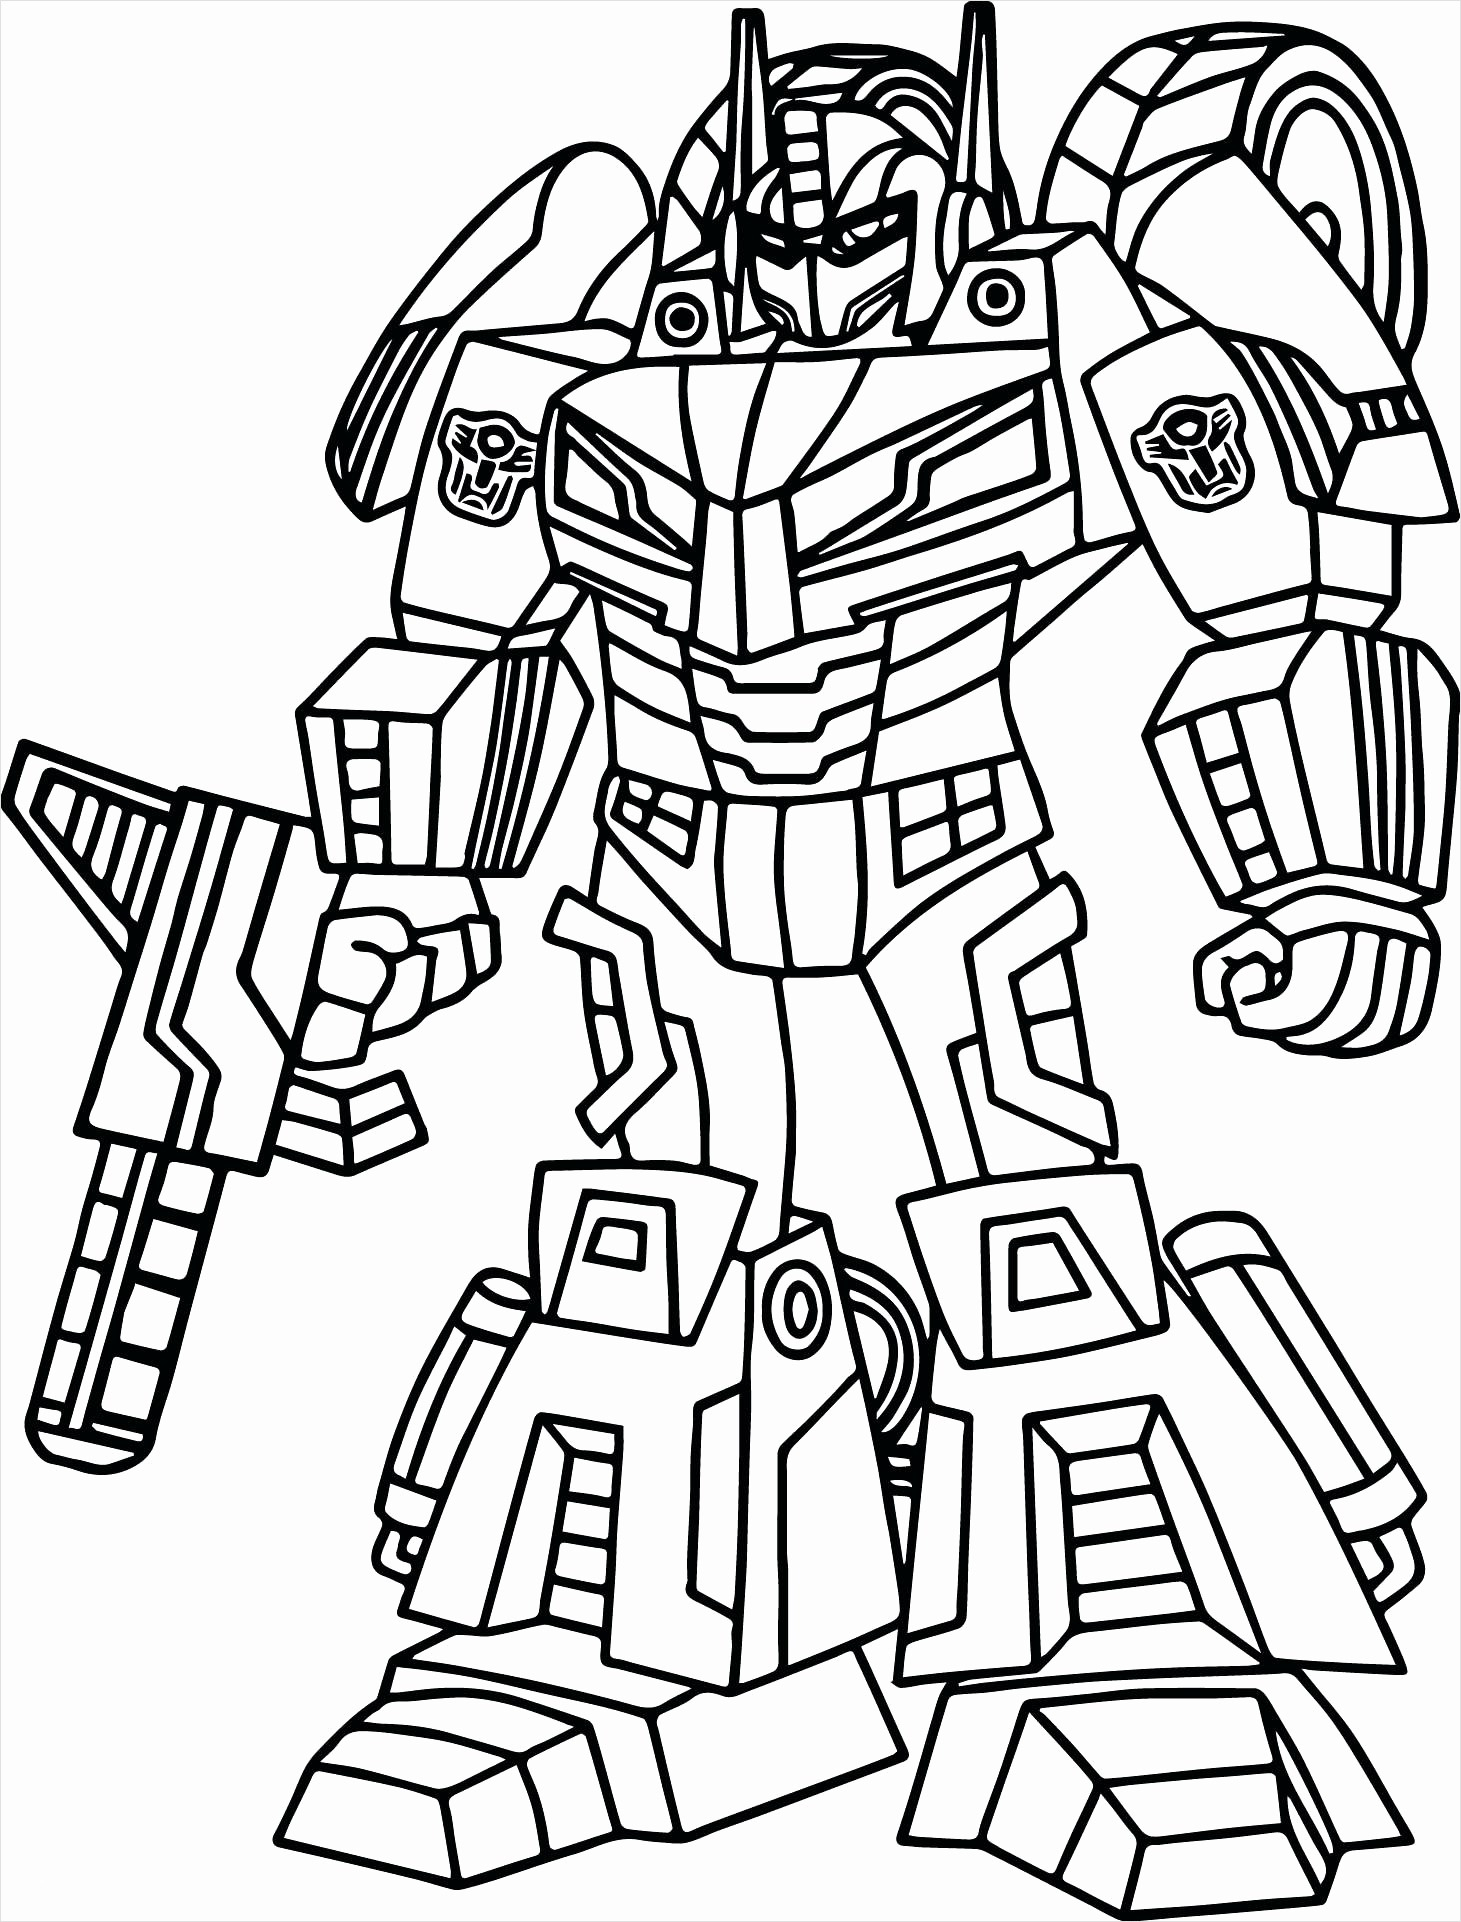 Printable Transformers Coloring Pages Coloring 30 Phenomenal Printable Transformers Coloring Pages